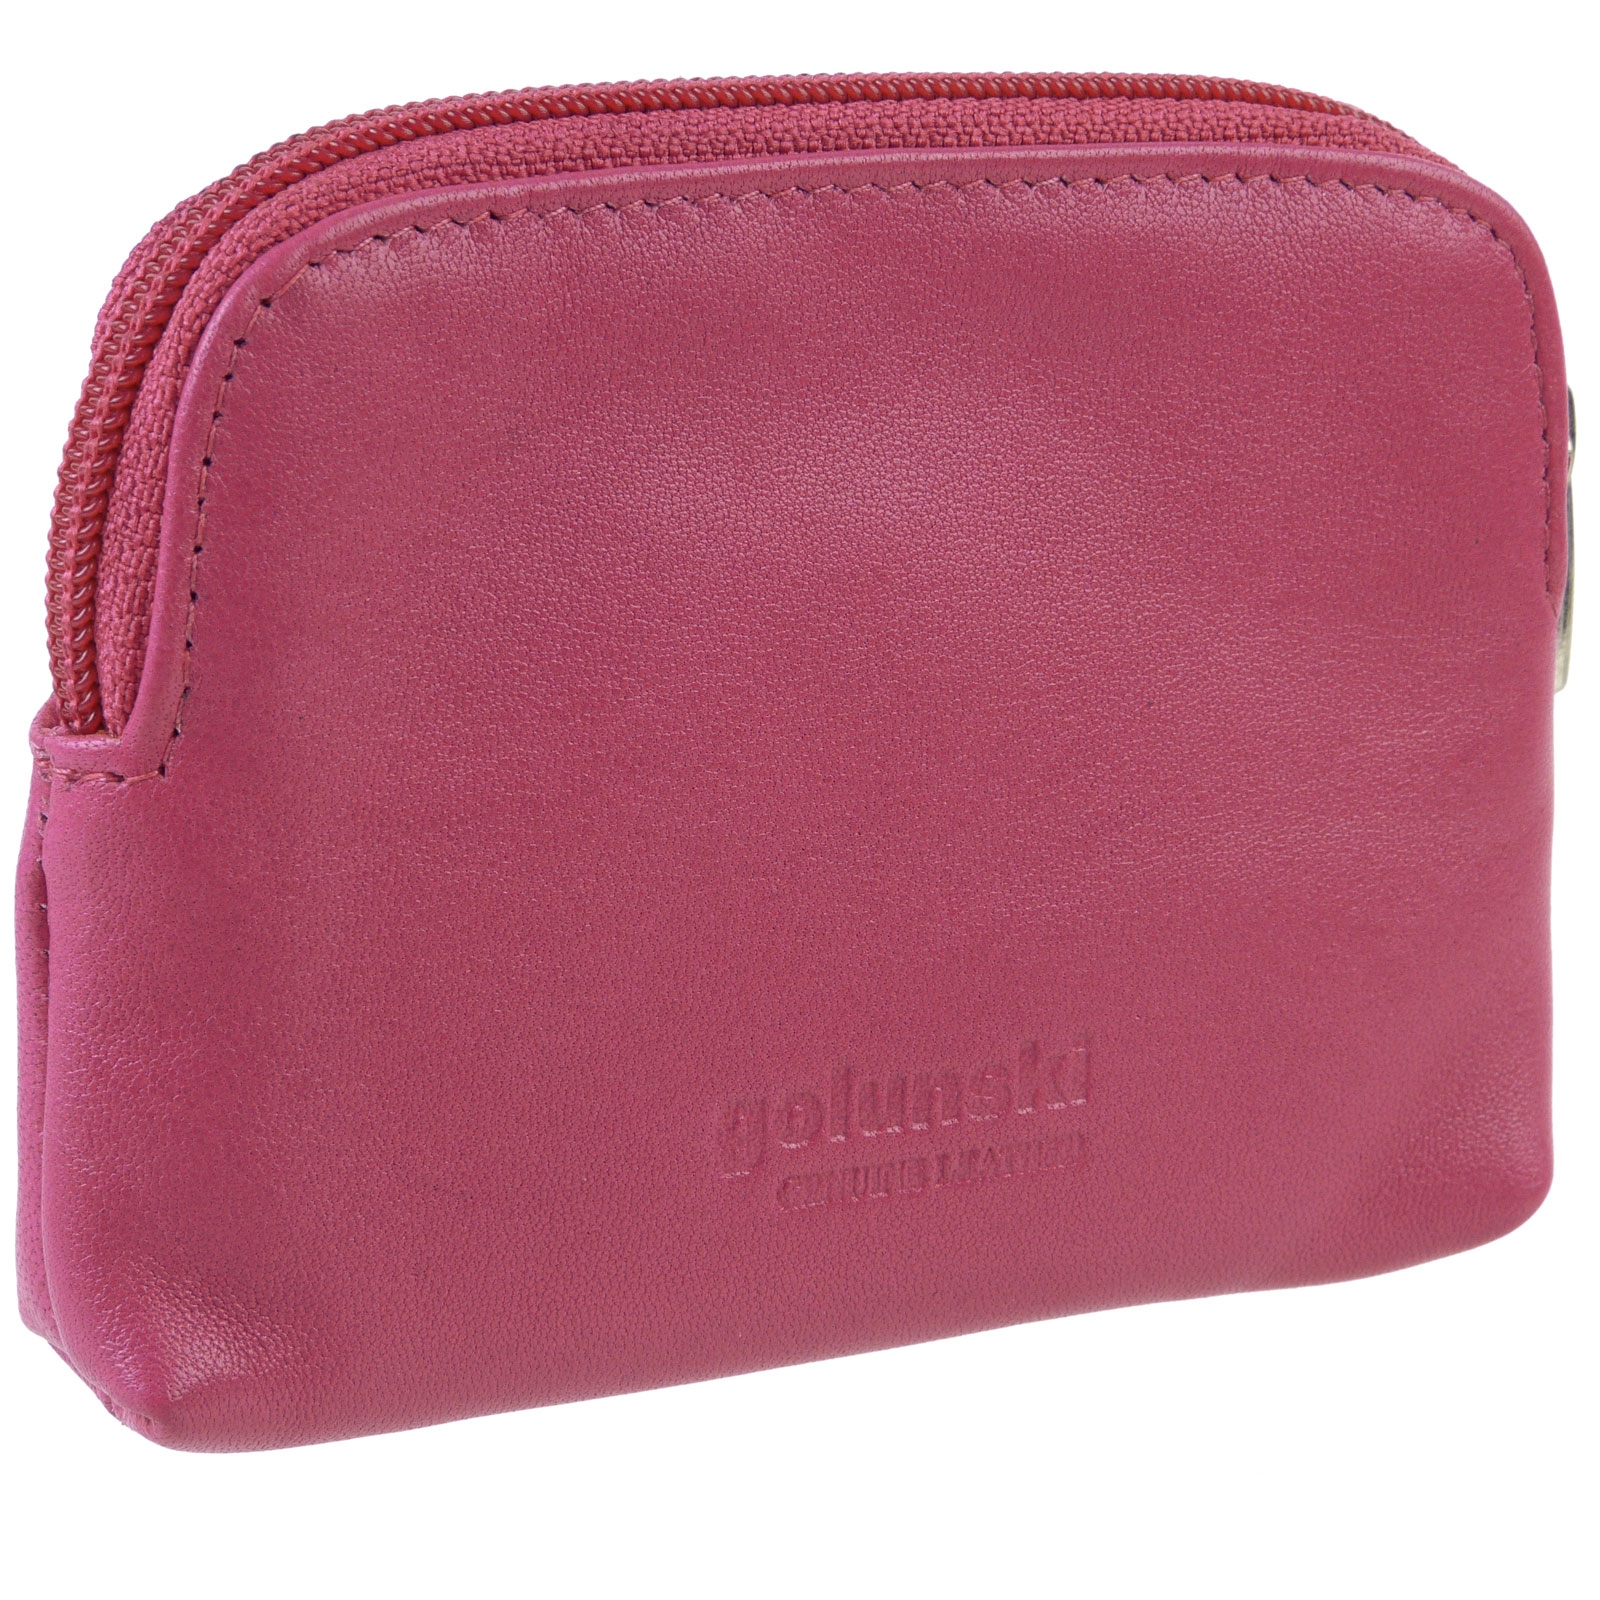 Ladies Super Soft Leather Coin Purse in 10 Colours by Golunski with ...